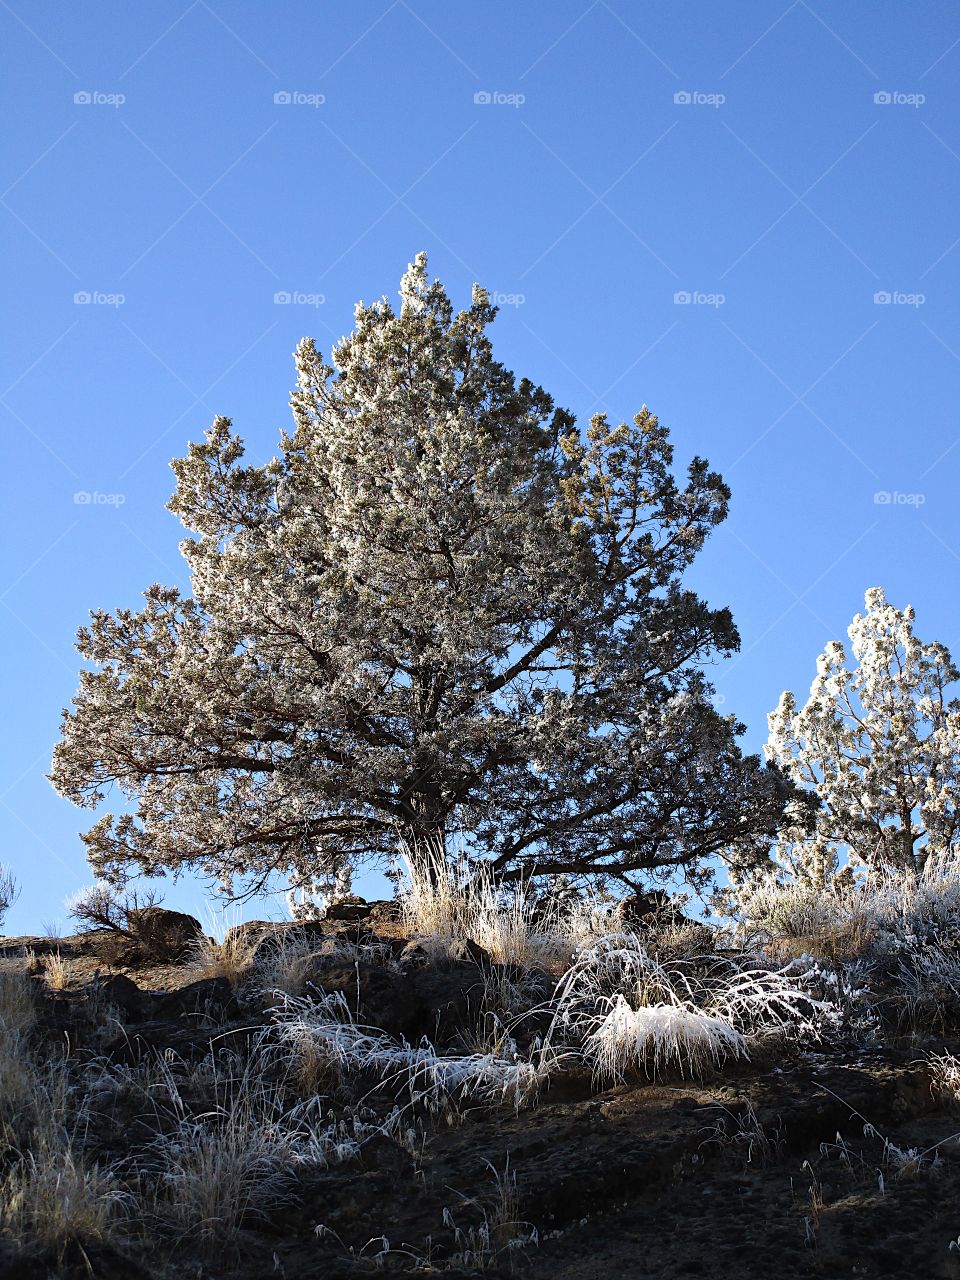 A magnificent frost covers juniper trees in Central Oregon on a beautiful sunny winter day. 